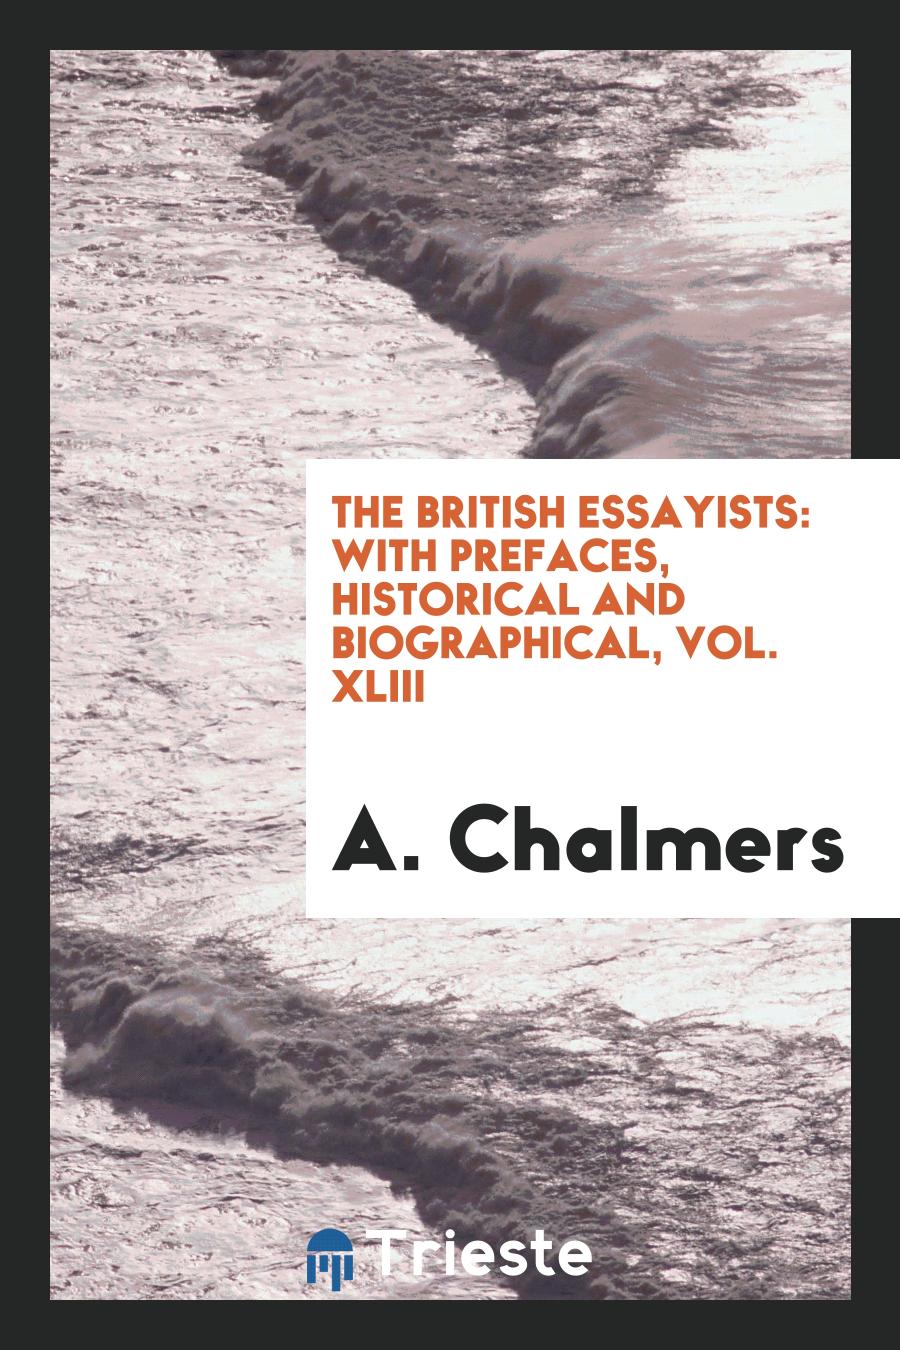 The British essayists: with prefaces, historical and biographical, Vol. XLIII